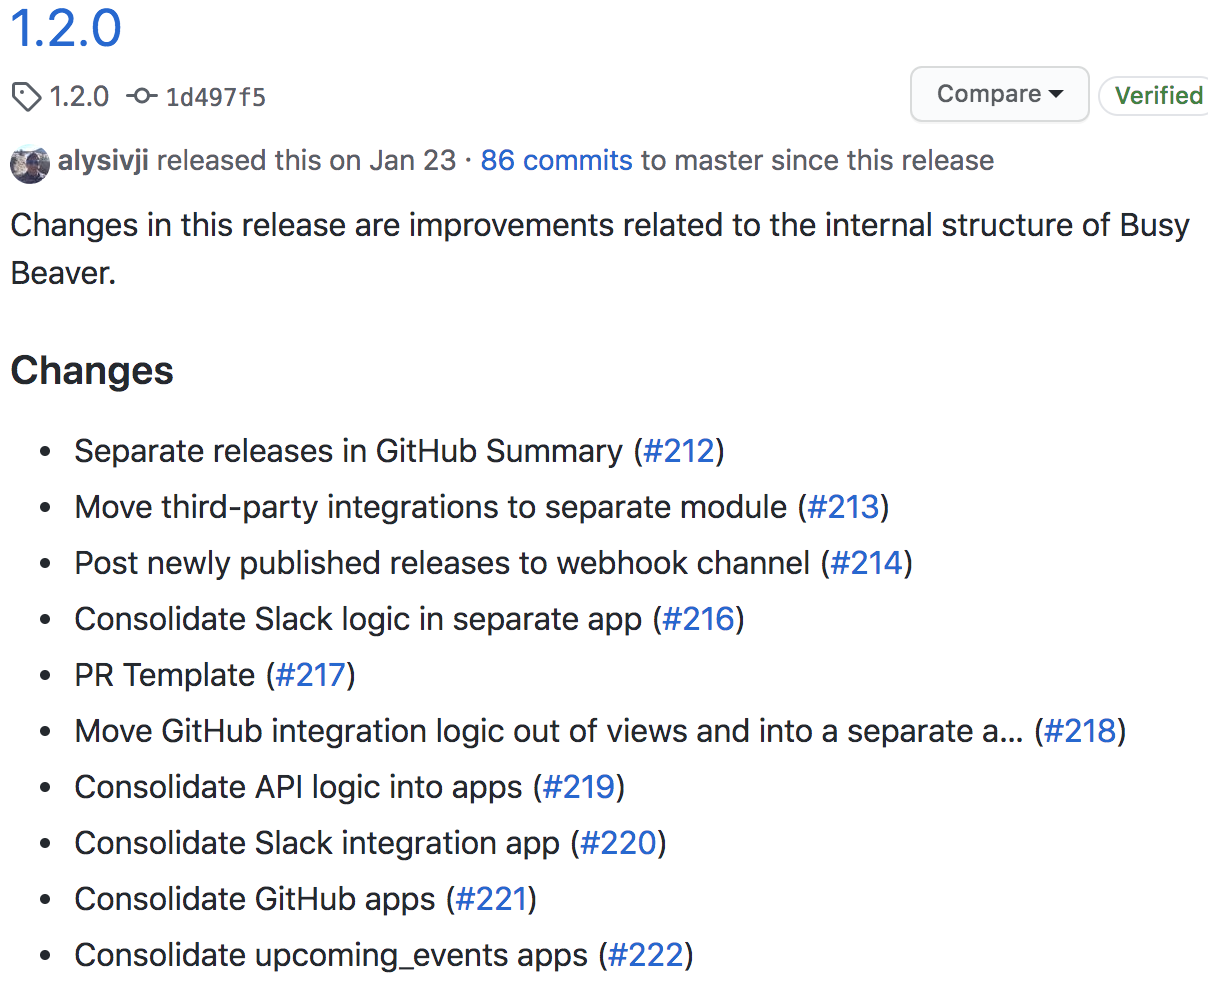 Example changelog; list of changes with links to the relevant GitHub Pull Request